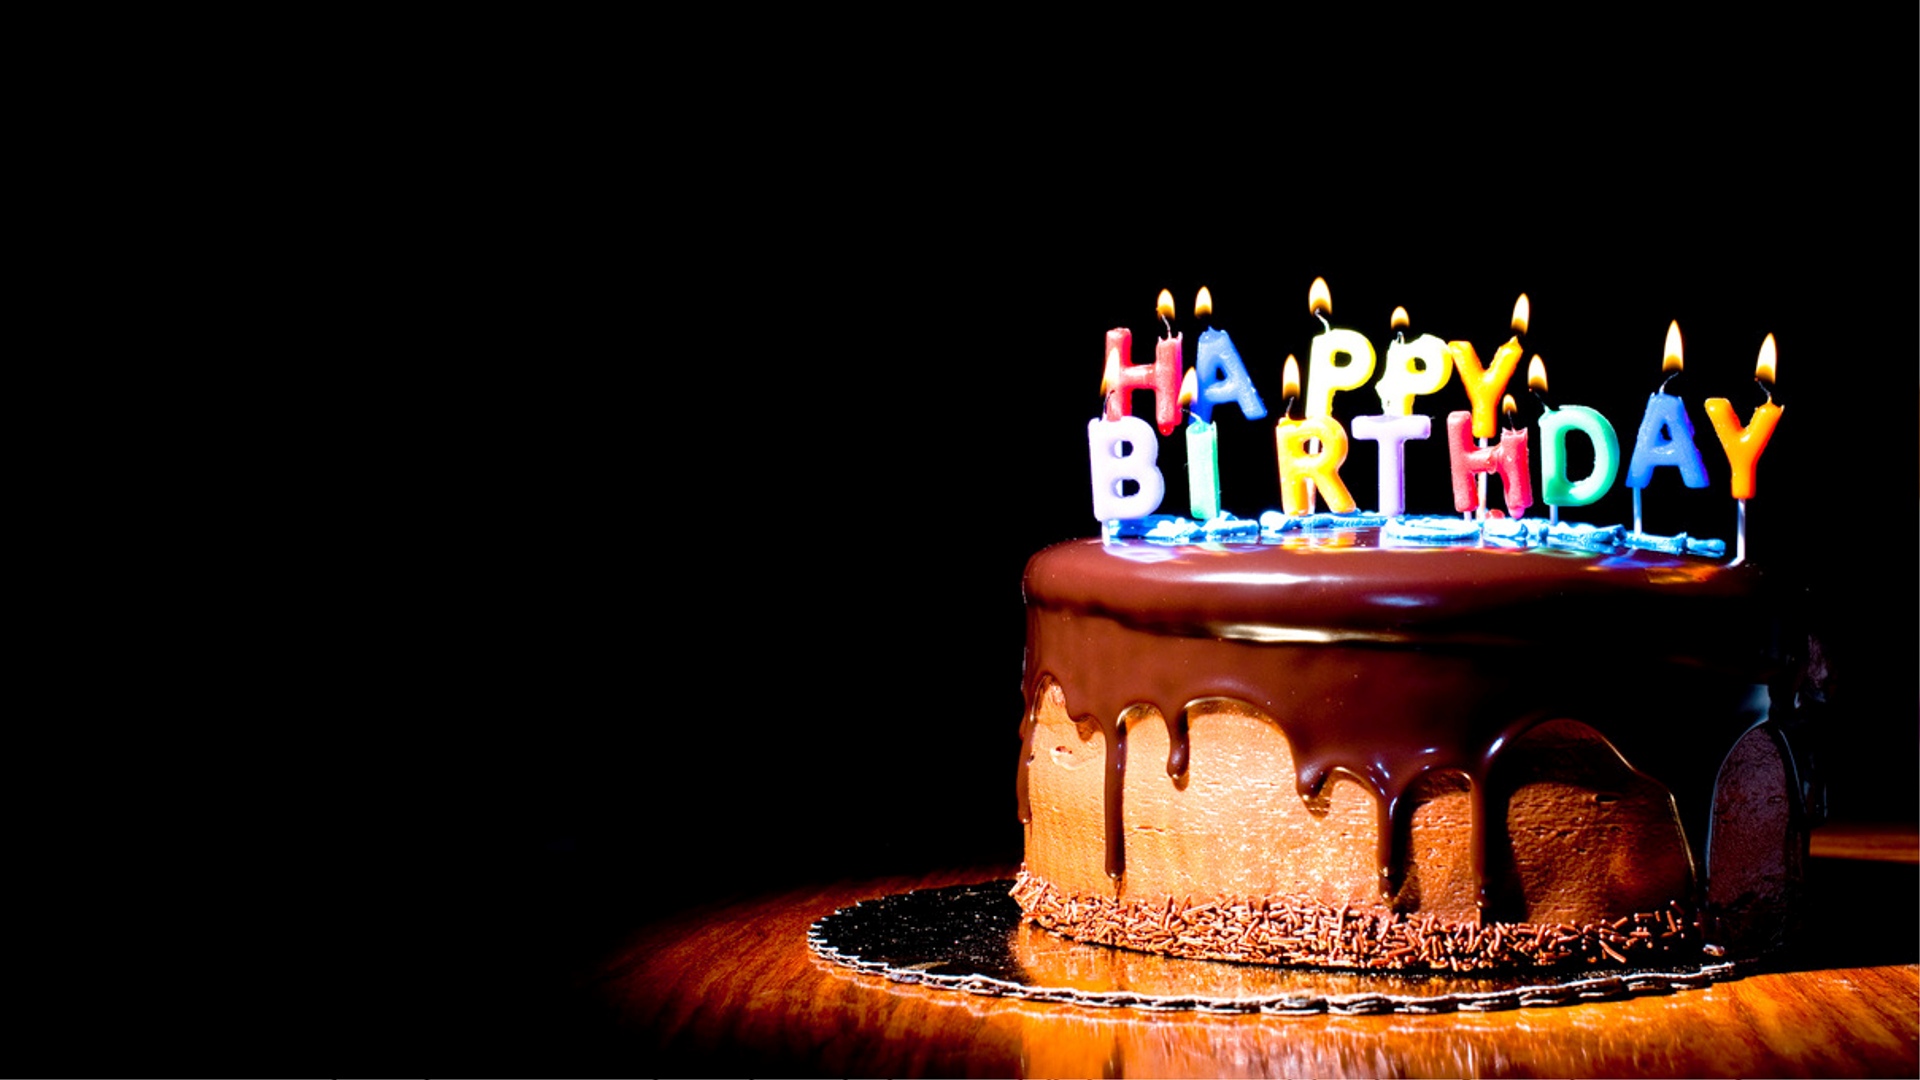 birthday-background-images-high-resolution-happy-birthday-cake-hd-images-wallpaper  - Blonde Episodes